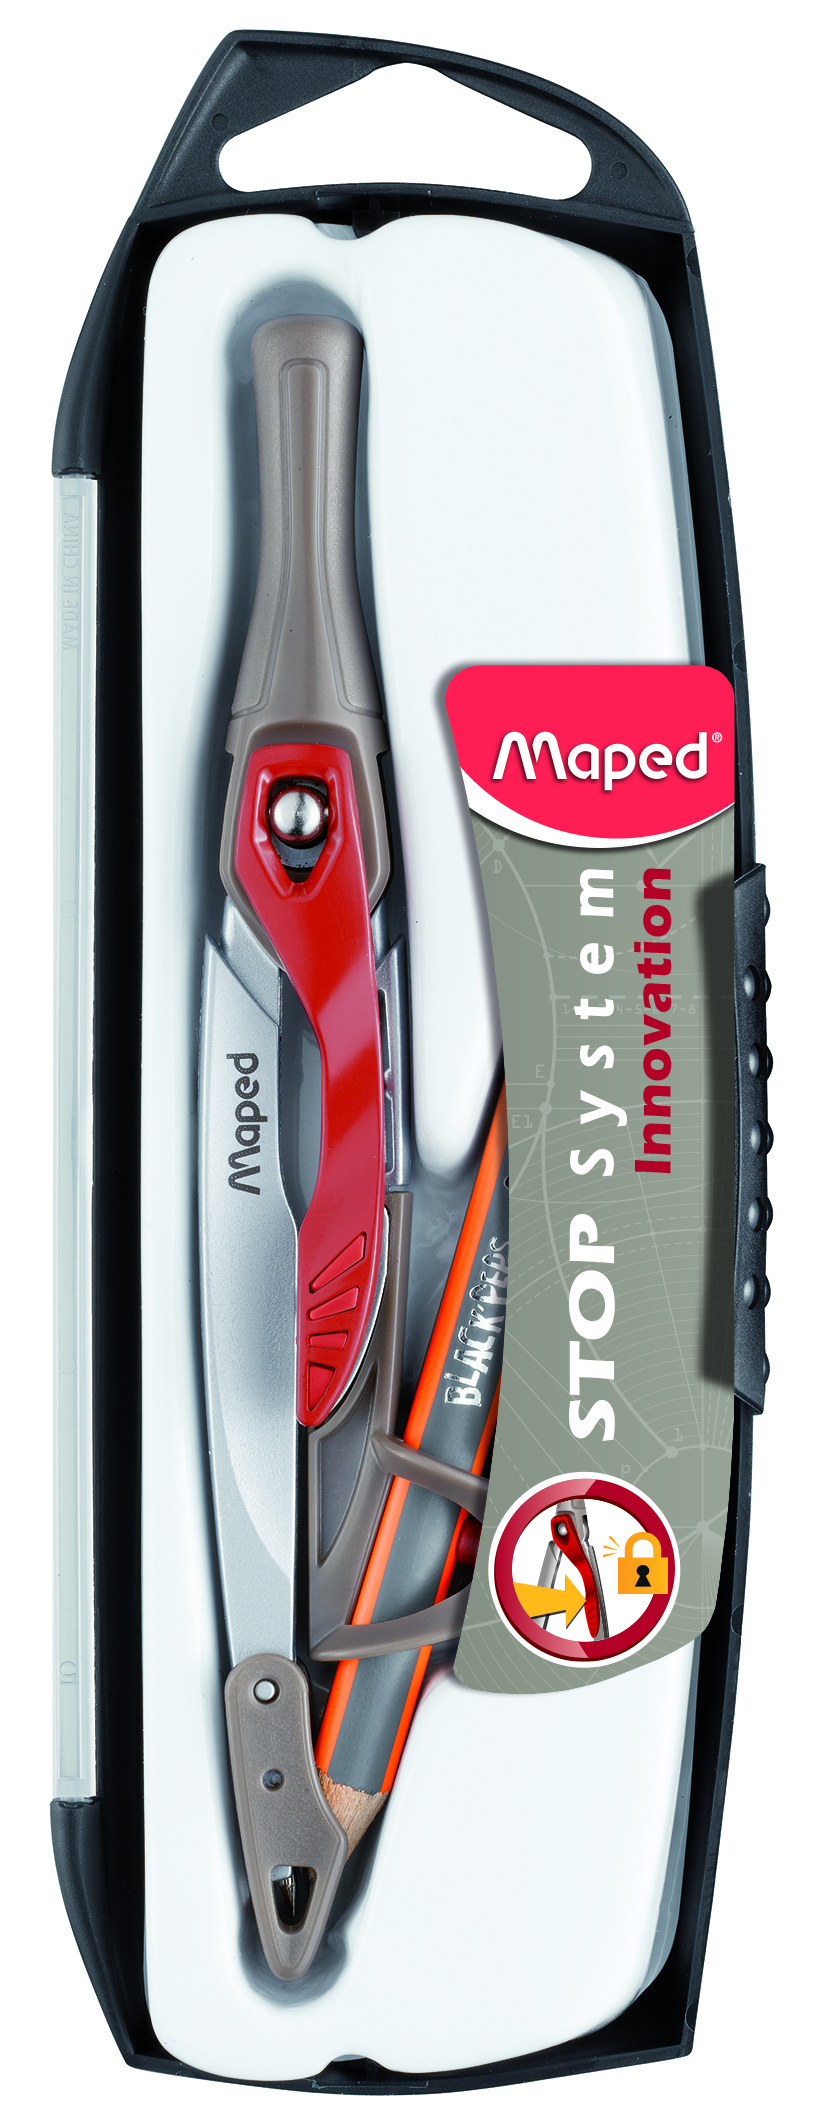 Maped Helix USA Stop System Innovation Compass 3 Piece Set, Assorted Colors  (196310), Red/White